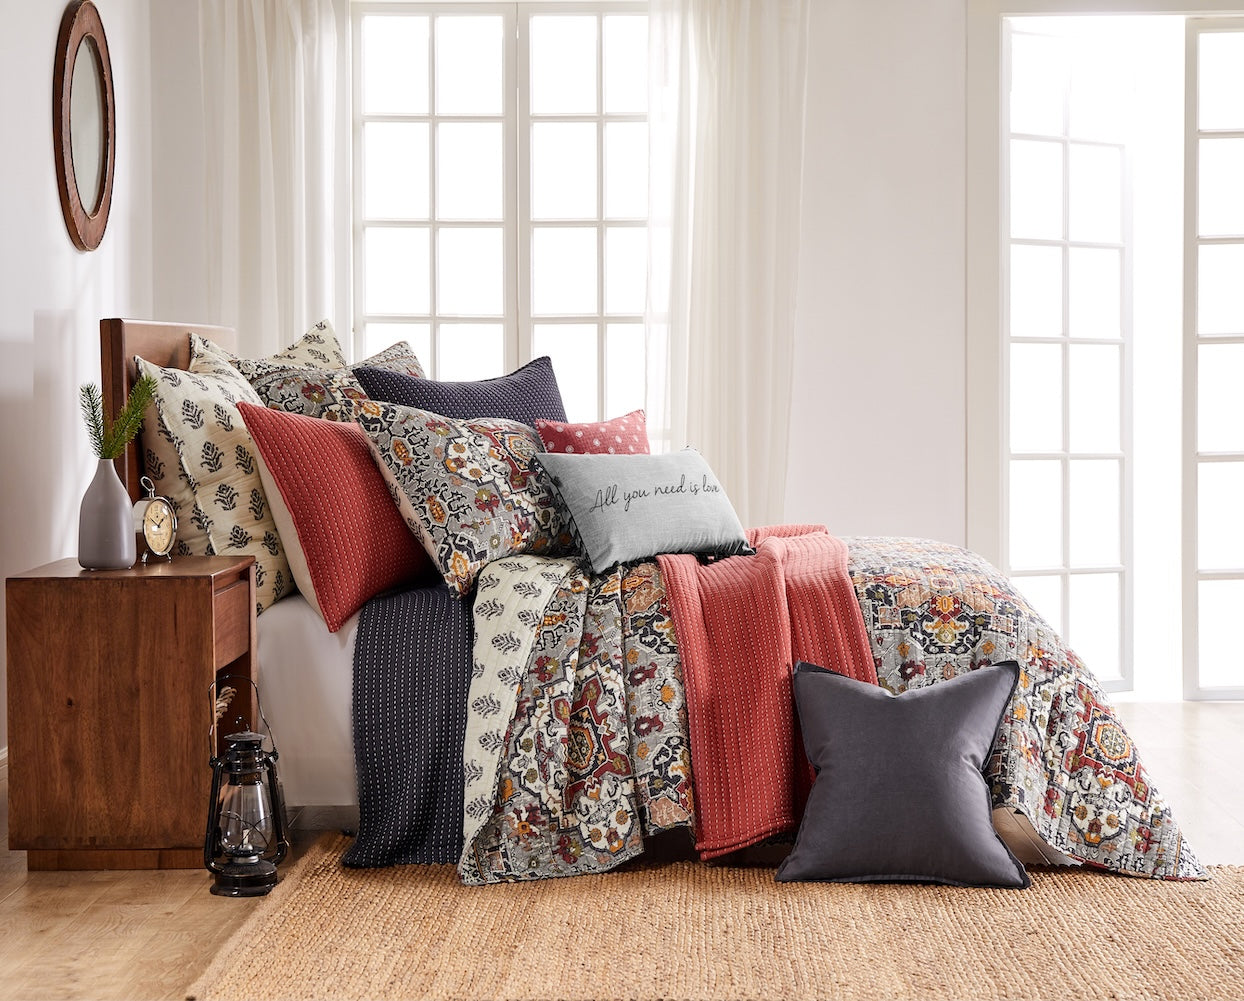  Levtex Home - Sophia Quilt Set - Full/Queen Quilt 88x92in. +  Two Standard Pillow Shams 26x20in. - Floral - Orange, Yellow, Red, Green,  Teal, and White - Reversible - Cotton Fabric : Home & Kitchen